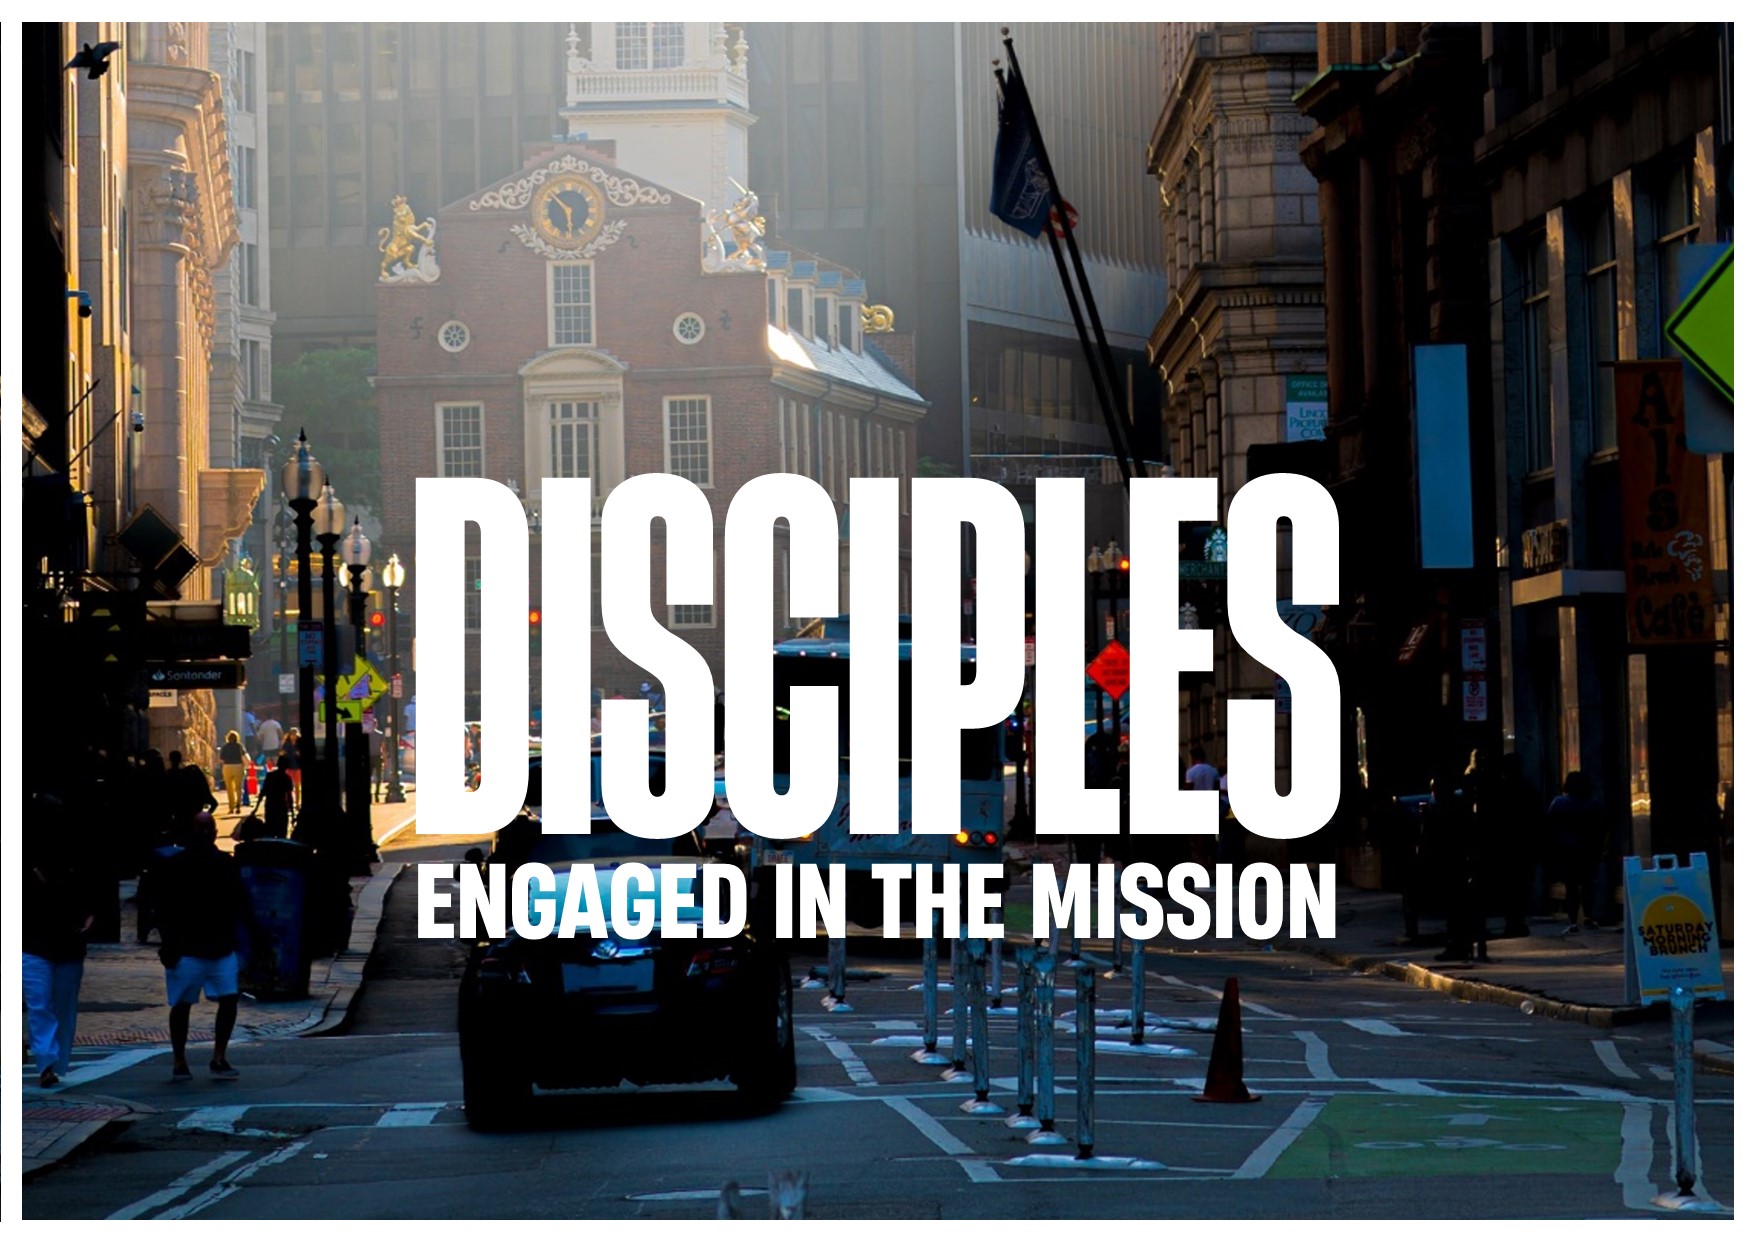 Disciples engaged in the Mission